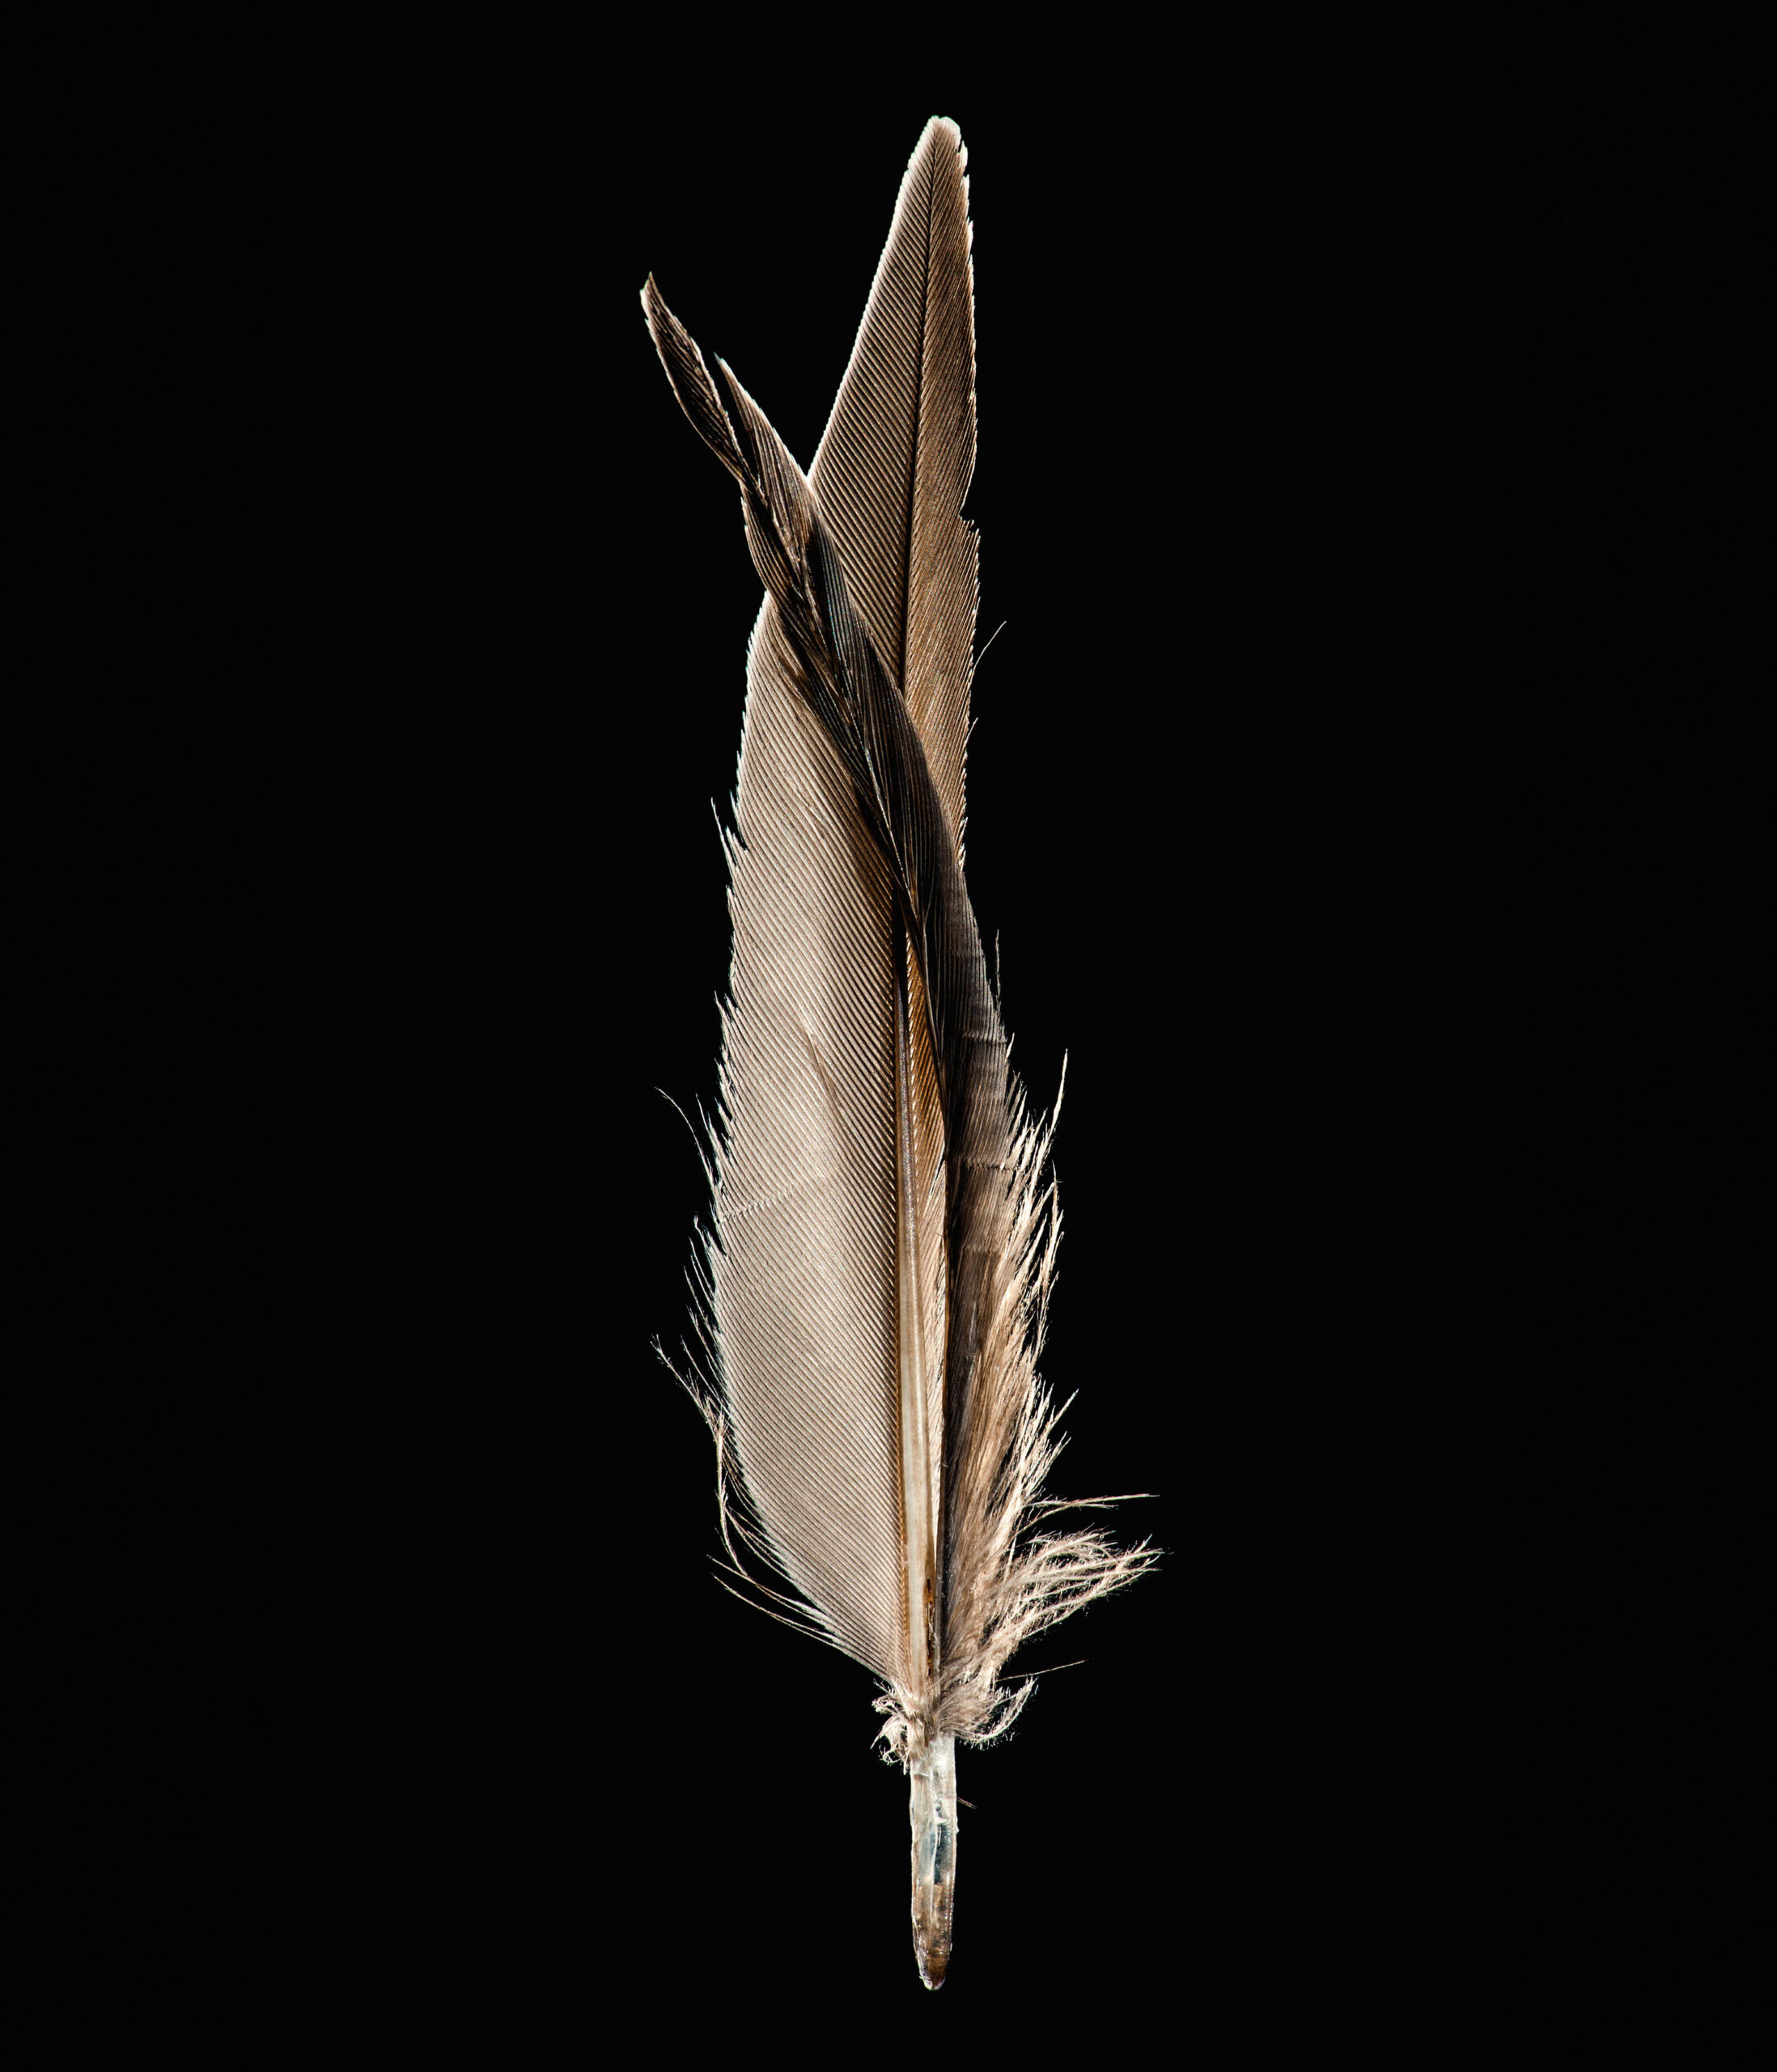 The common swift has a split feather